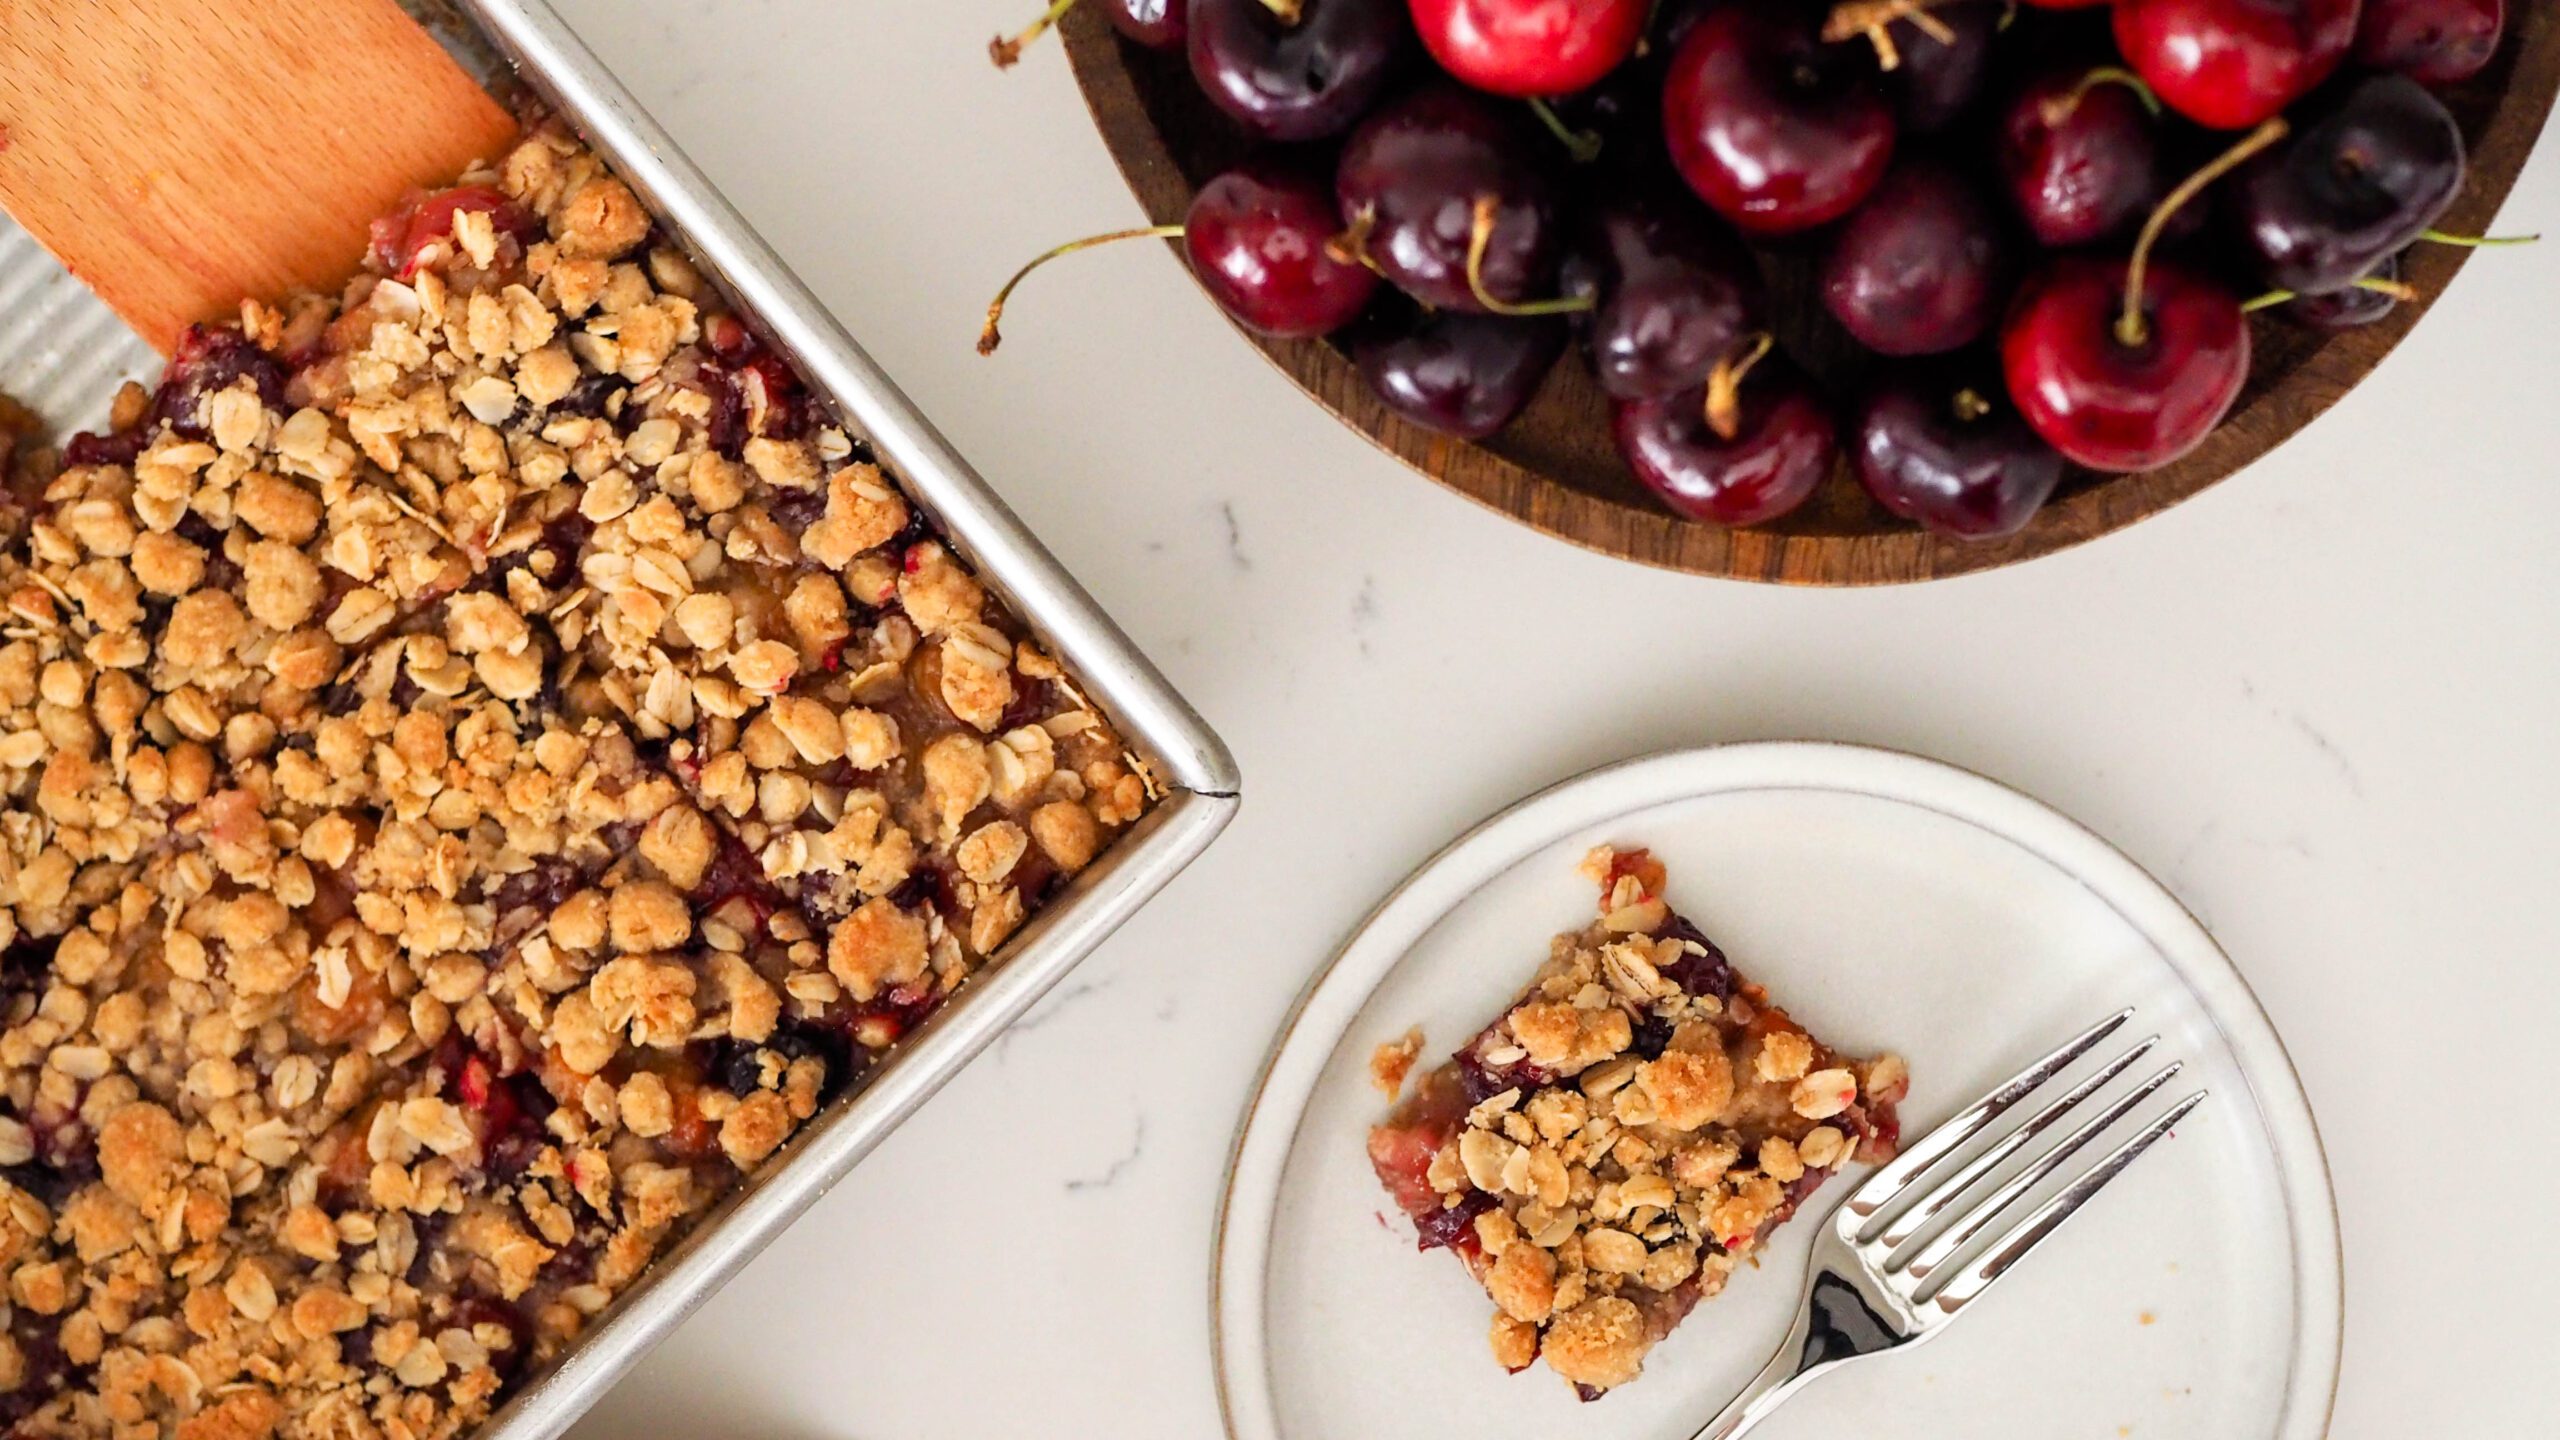 An overhead view of a pan of cherry crumble bars and nearby cherries.